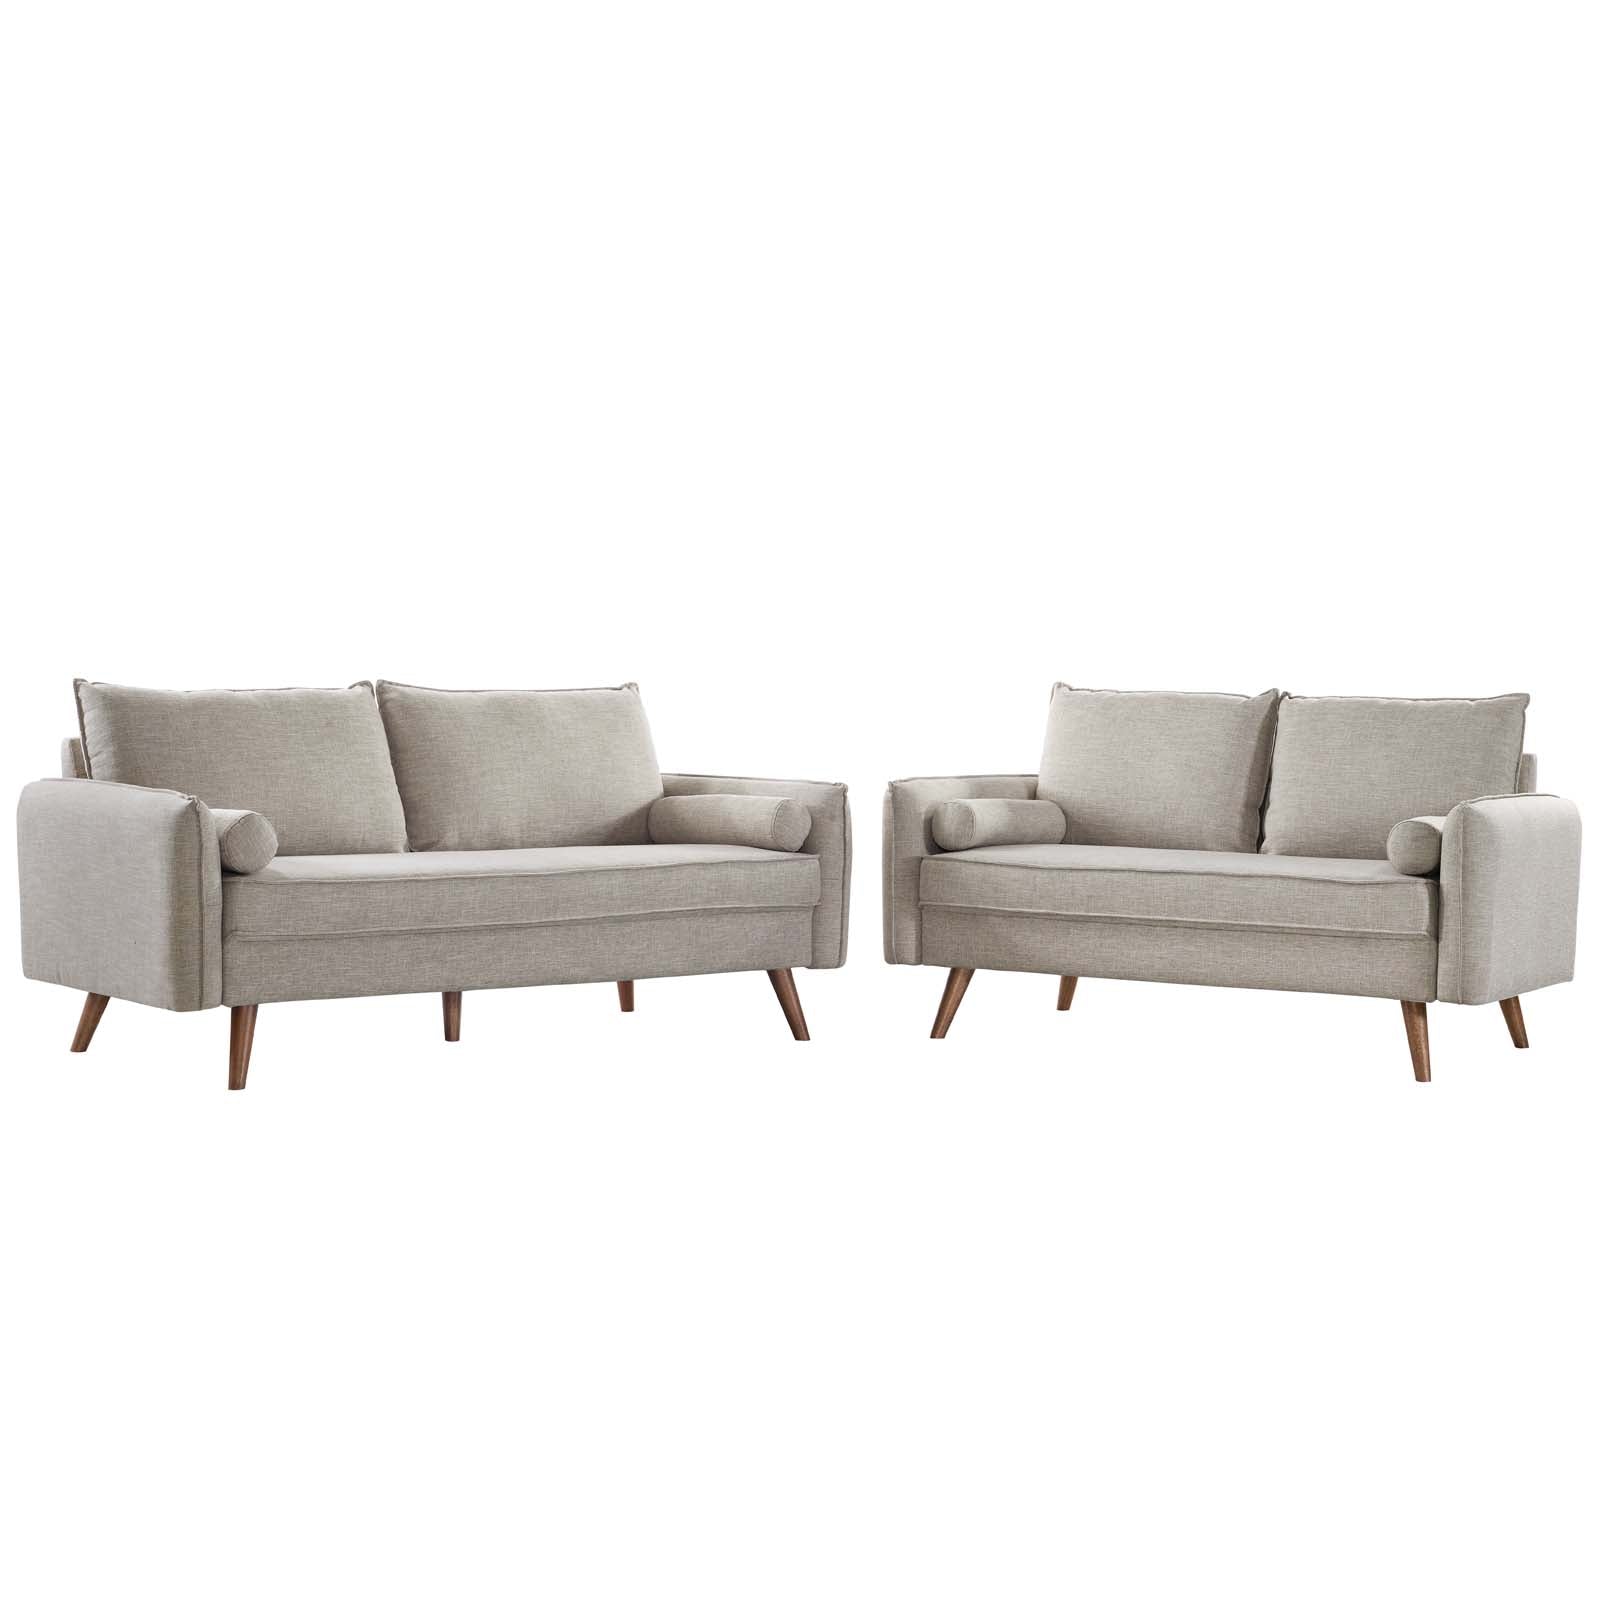 Modway Sofas & Couches - Revive-Upholstered-Fabric-Sofa-and-Loveseat-Set-Beige